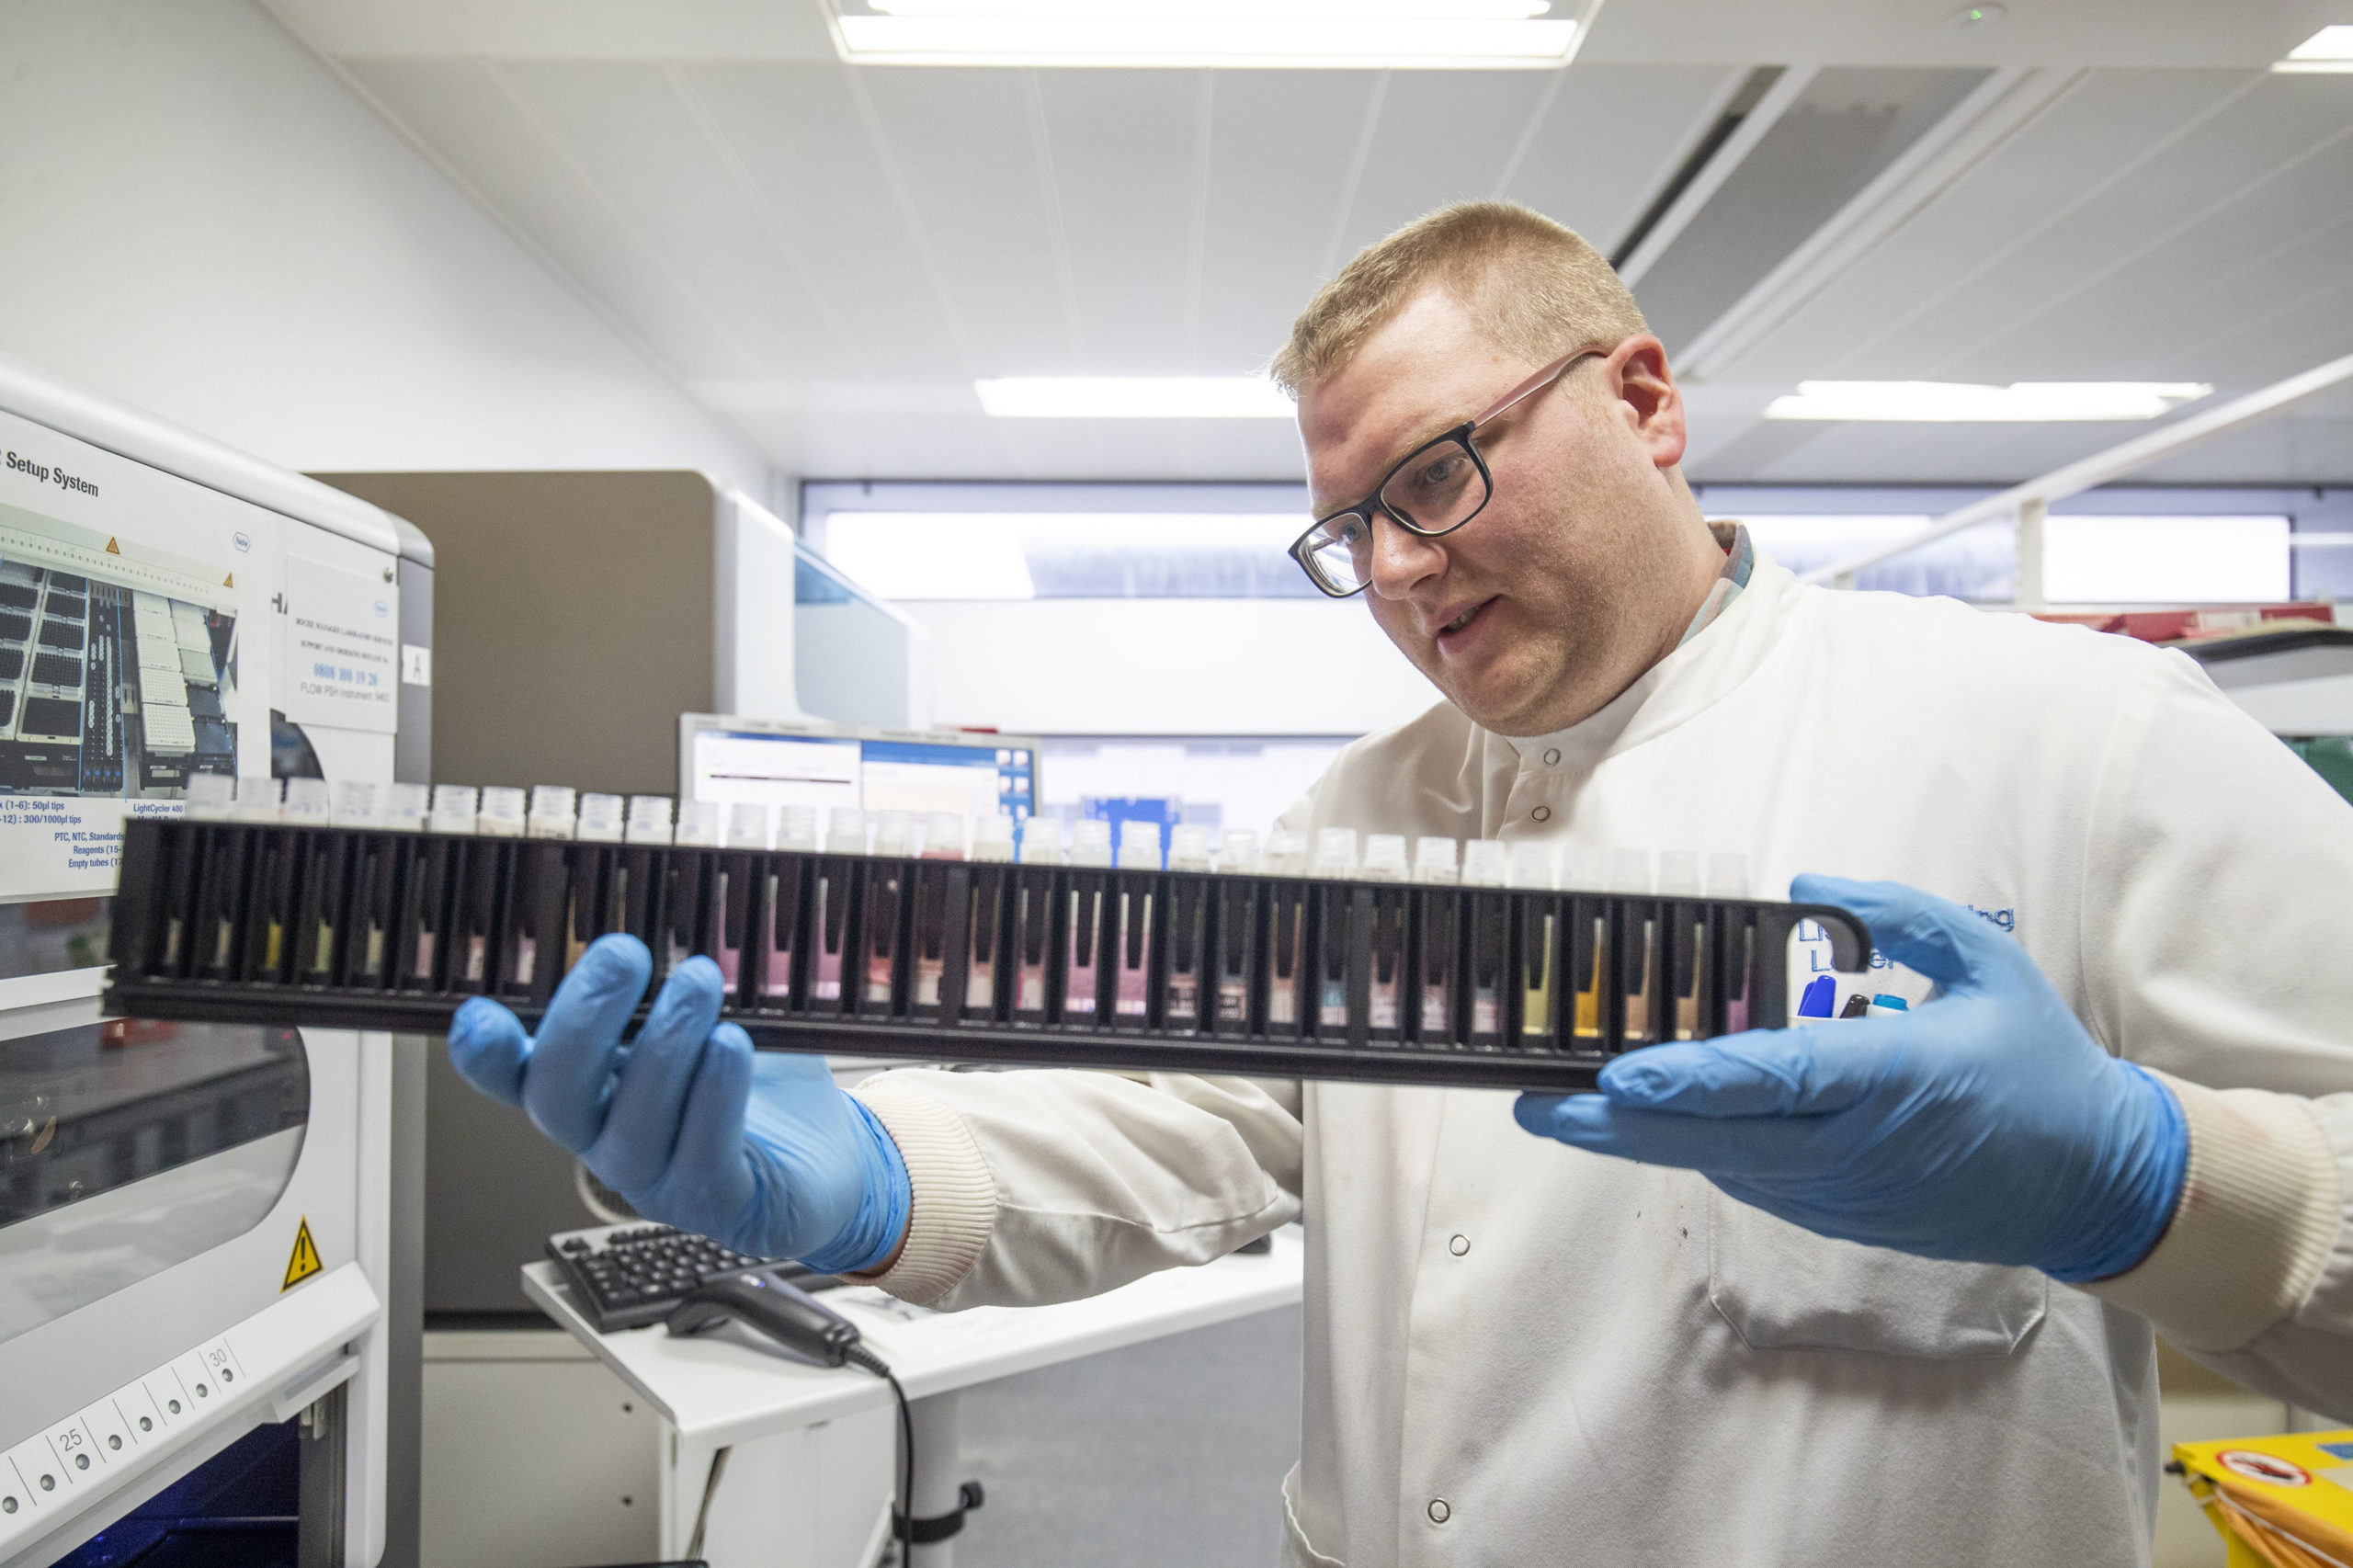 Clinical support technician Douglas Condie extracts viruses from swab samples so that the genetic structure of a virus can be analysed and identified in the coronavirus testing laboratory at Glasgow Royal Infirmary, on February 19, 2020 in Glasgow, Scotland. (Photo by Jane Barlow - WPA Pool/Getty Images)